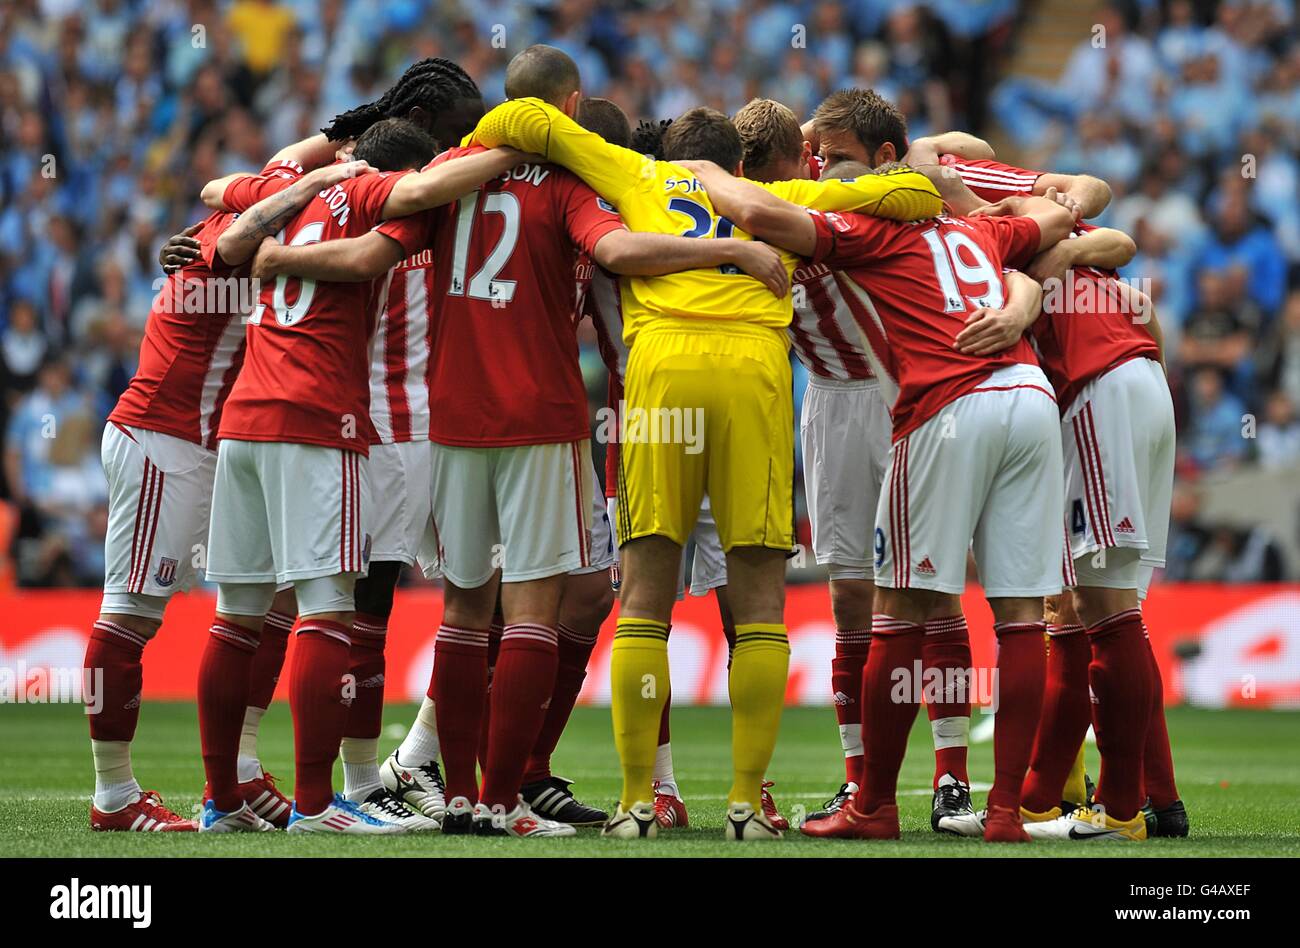 Soccer - FA Cup - Final - Manchester City v Stoke City - Wembley Stadium. Stoke City players gather in a huddle before the match Stock Photo